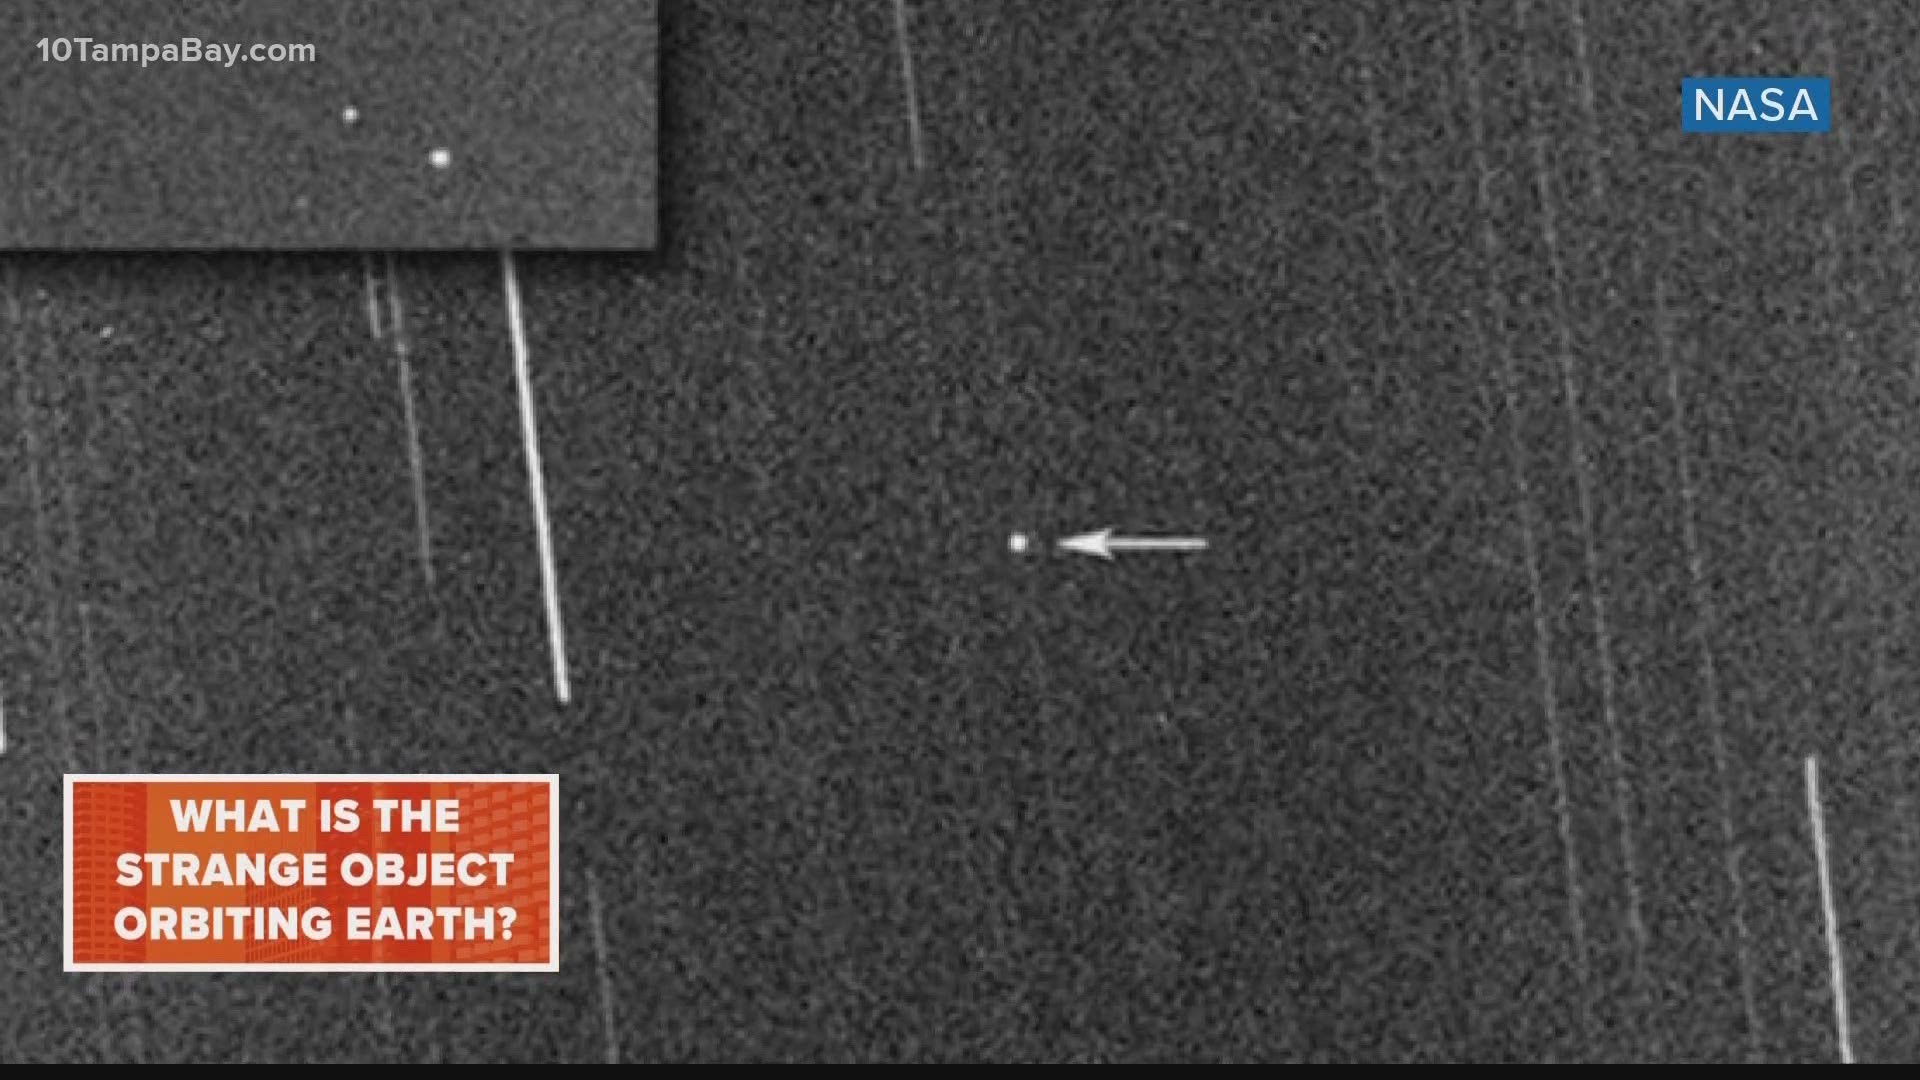 The unknown object was discovered in September. NASA says it could be a piece of the Surveyor 2 mission's rocket.